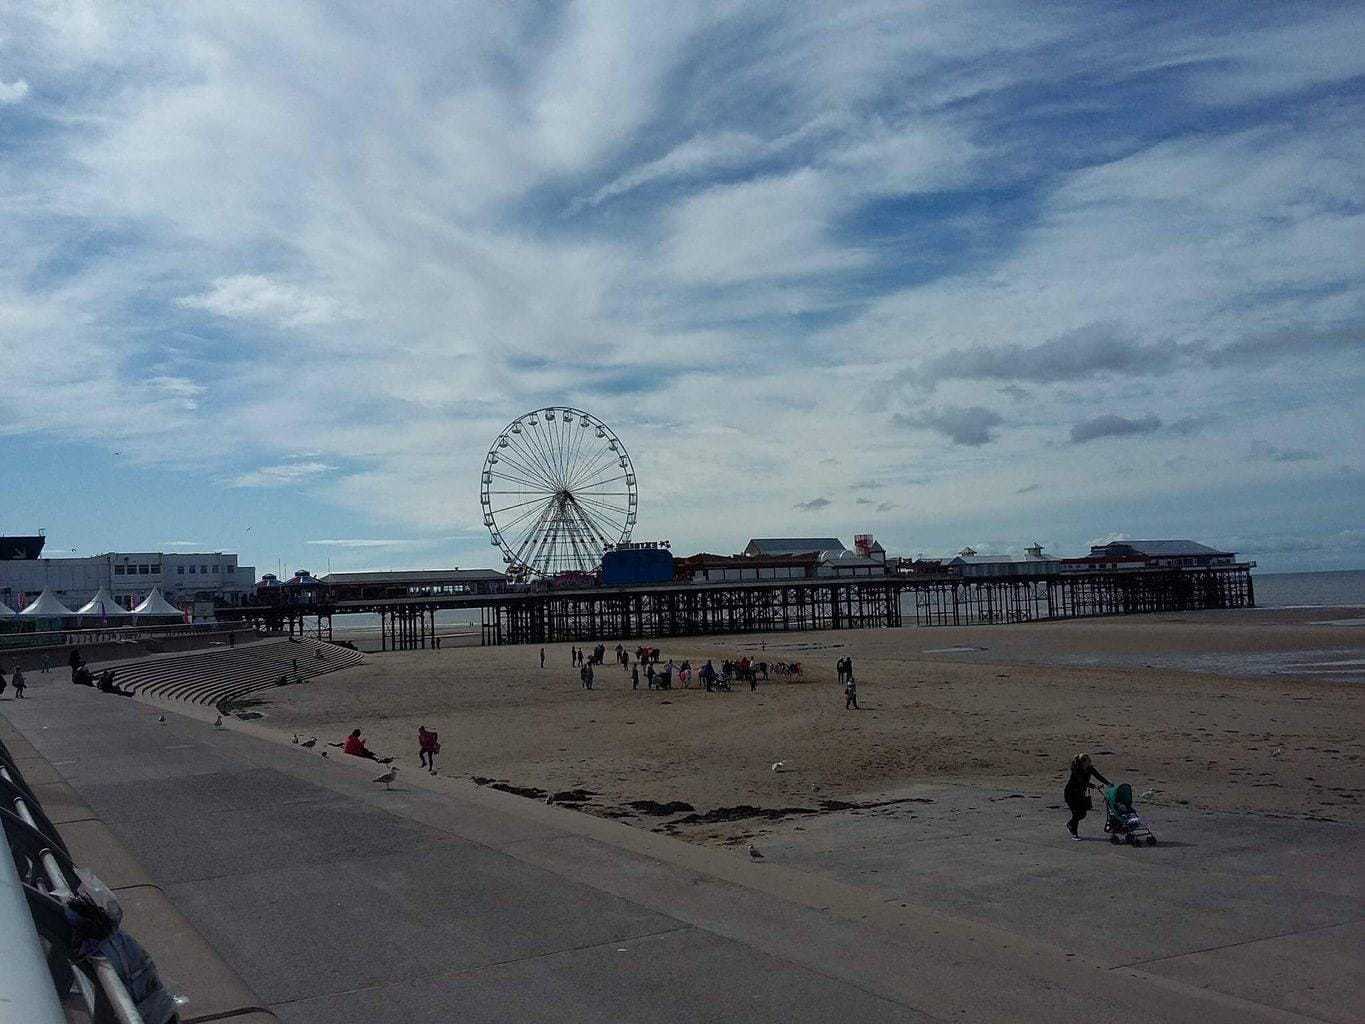 Blackpool Review - The Family Friendly Destination